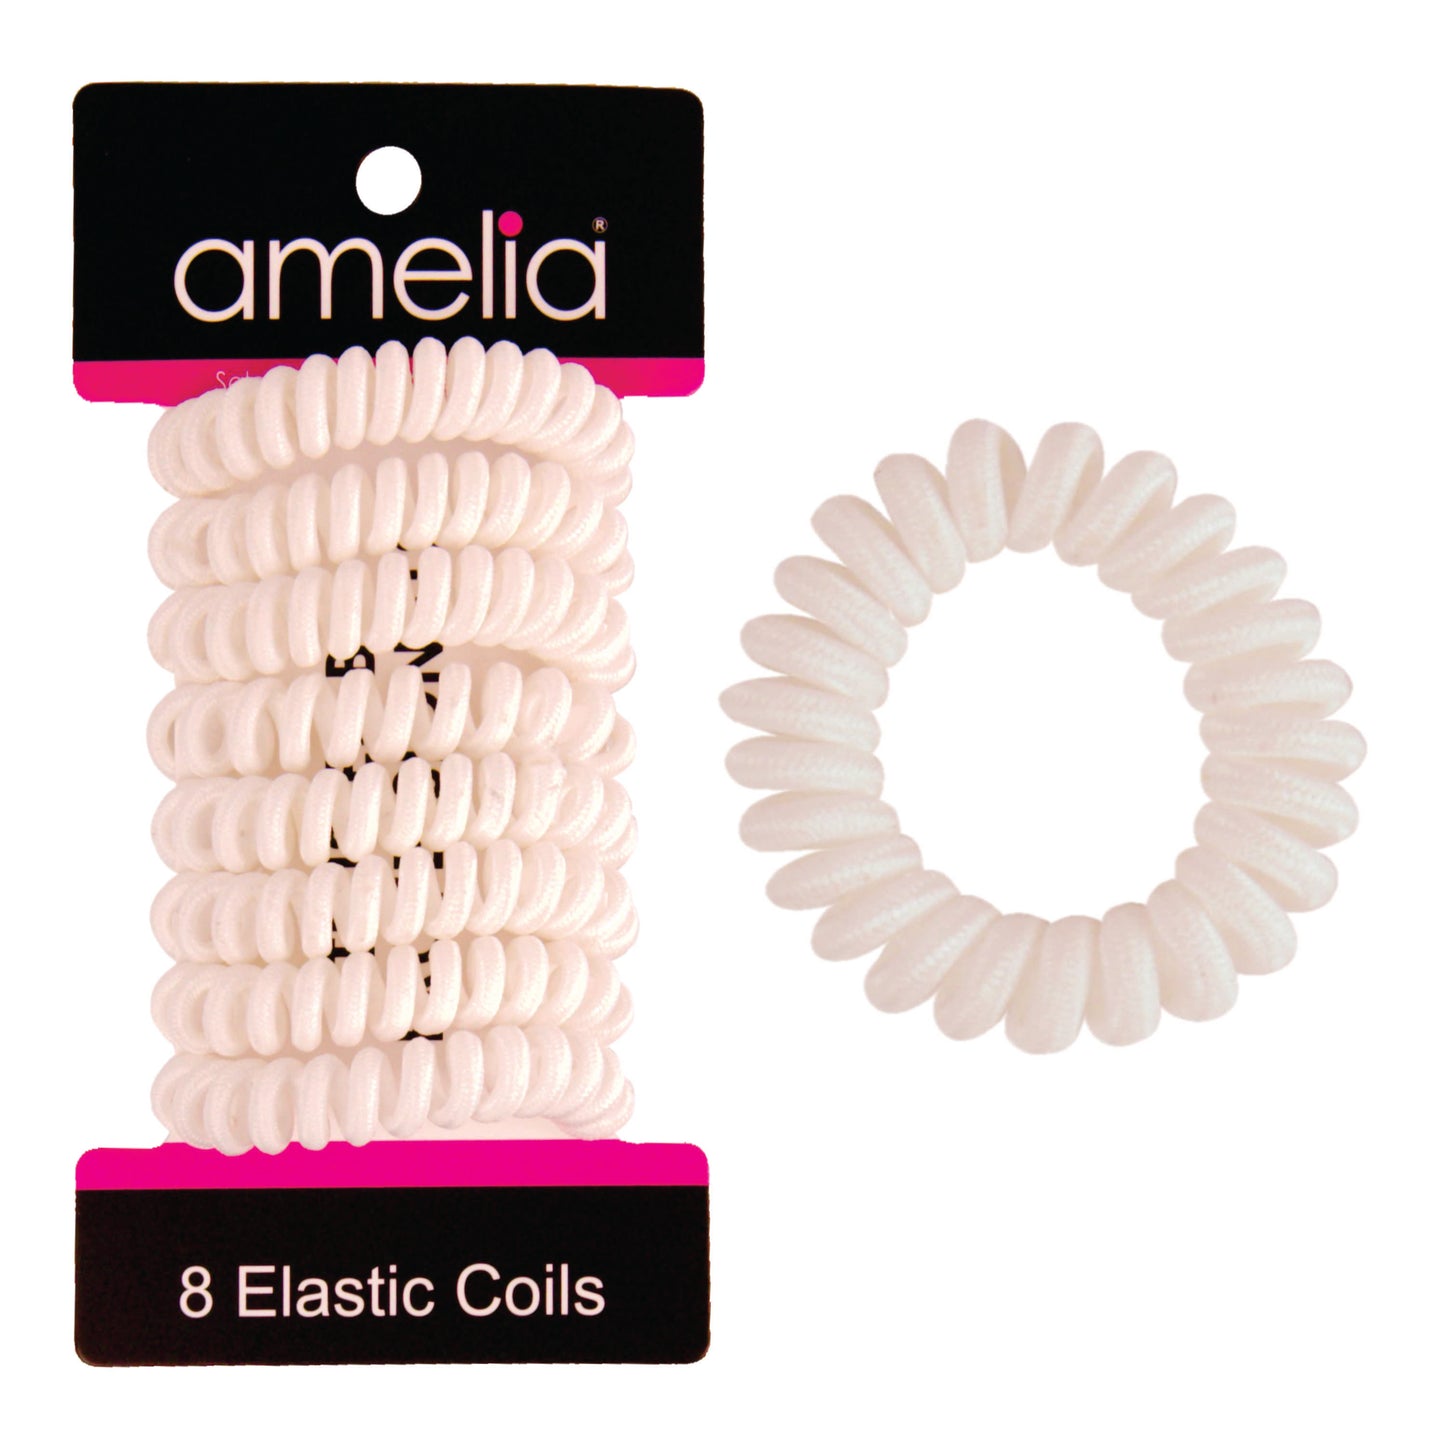 Amelia Beauty, 8 Small Fabric Wrapped Elastic Hair Coils, 1.75in Diameter Spiral Hair Ties, Gentle on Hair, Strong Hold and Minimizes Dents and Creases, White